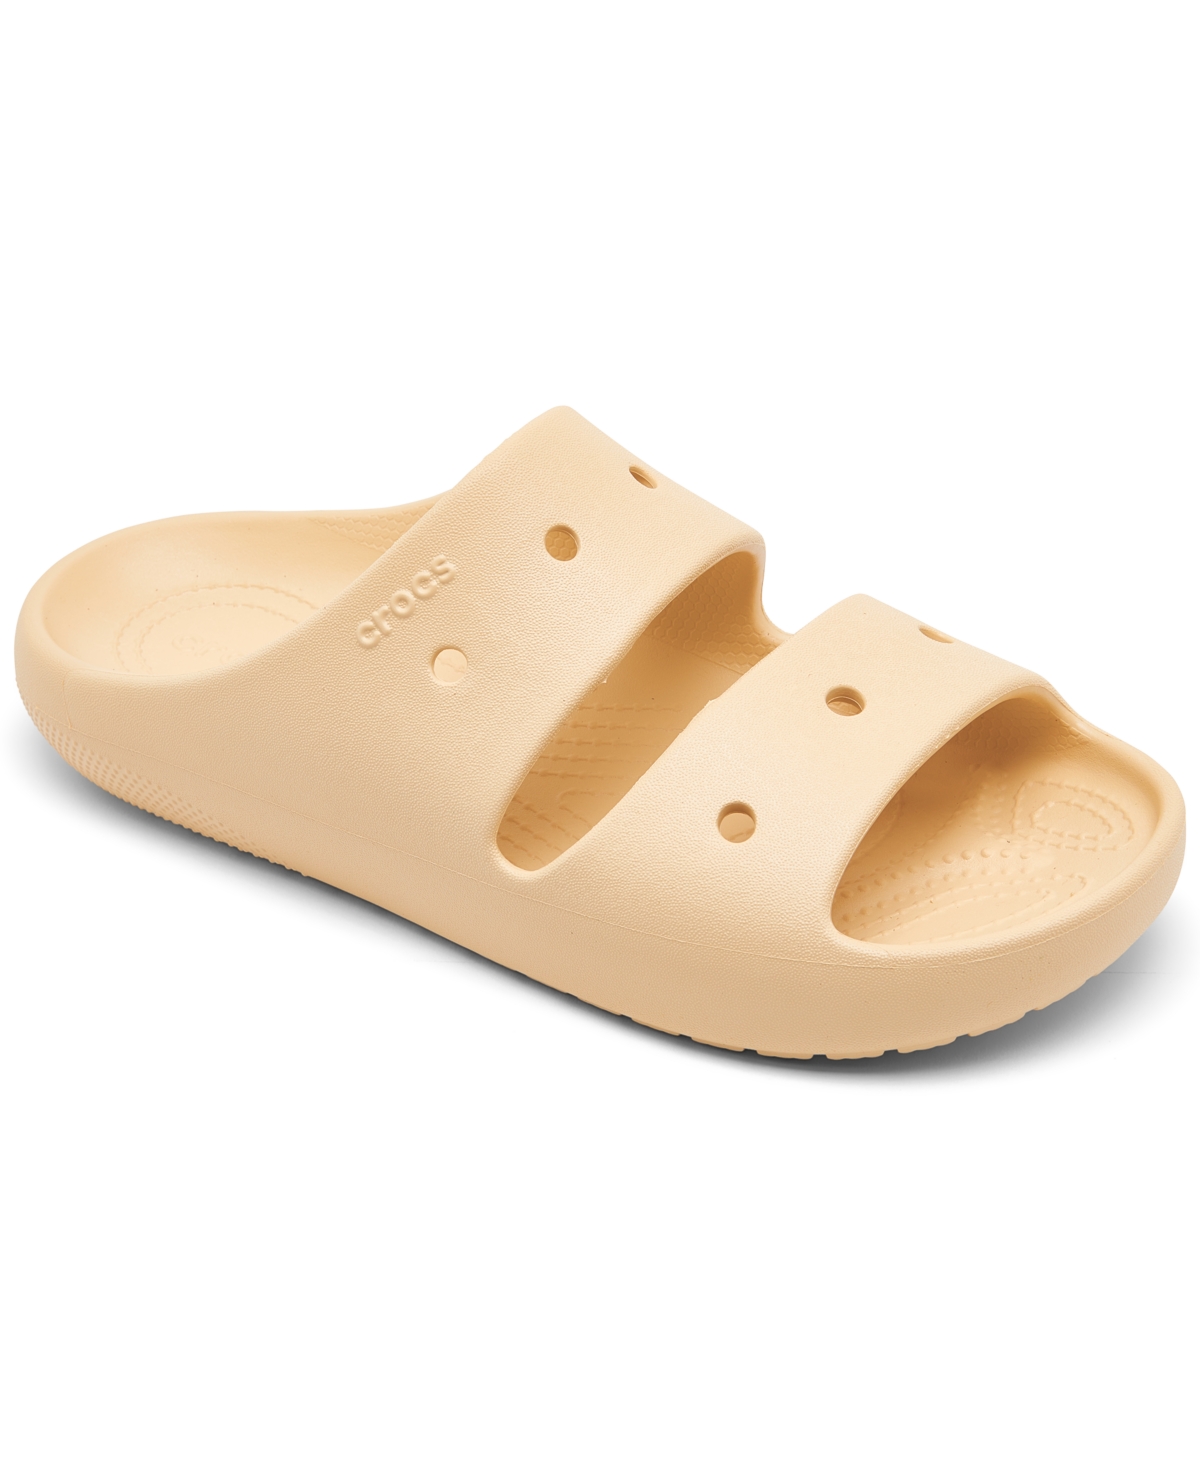 Crocs Men's And Women's 2.0 Classic Slide Sandals From Finish Line In Shitake